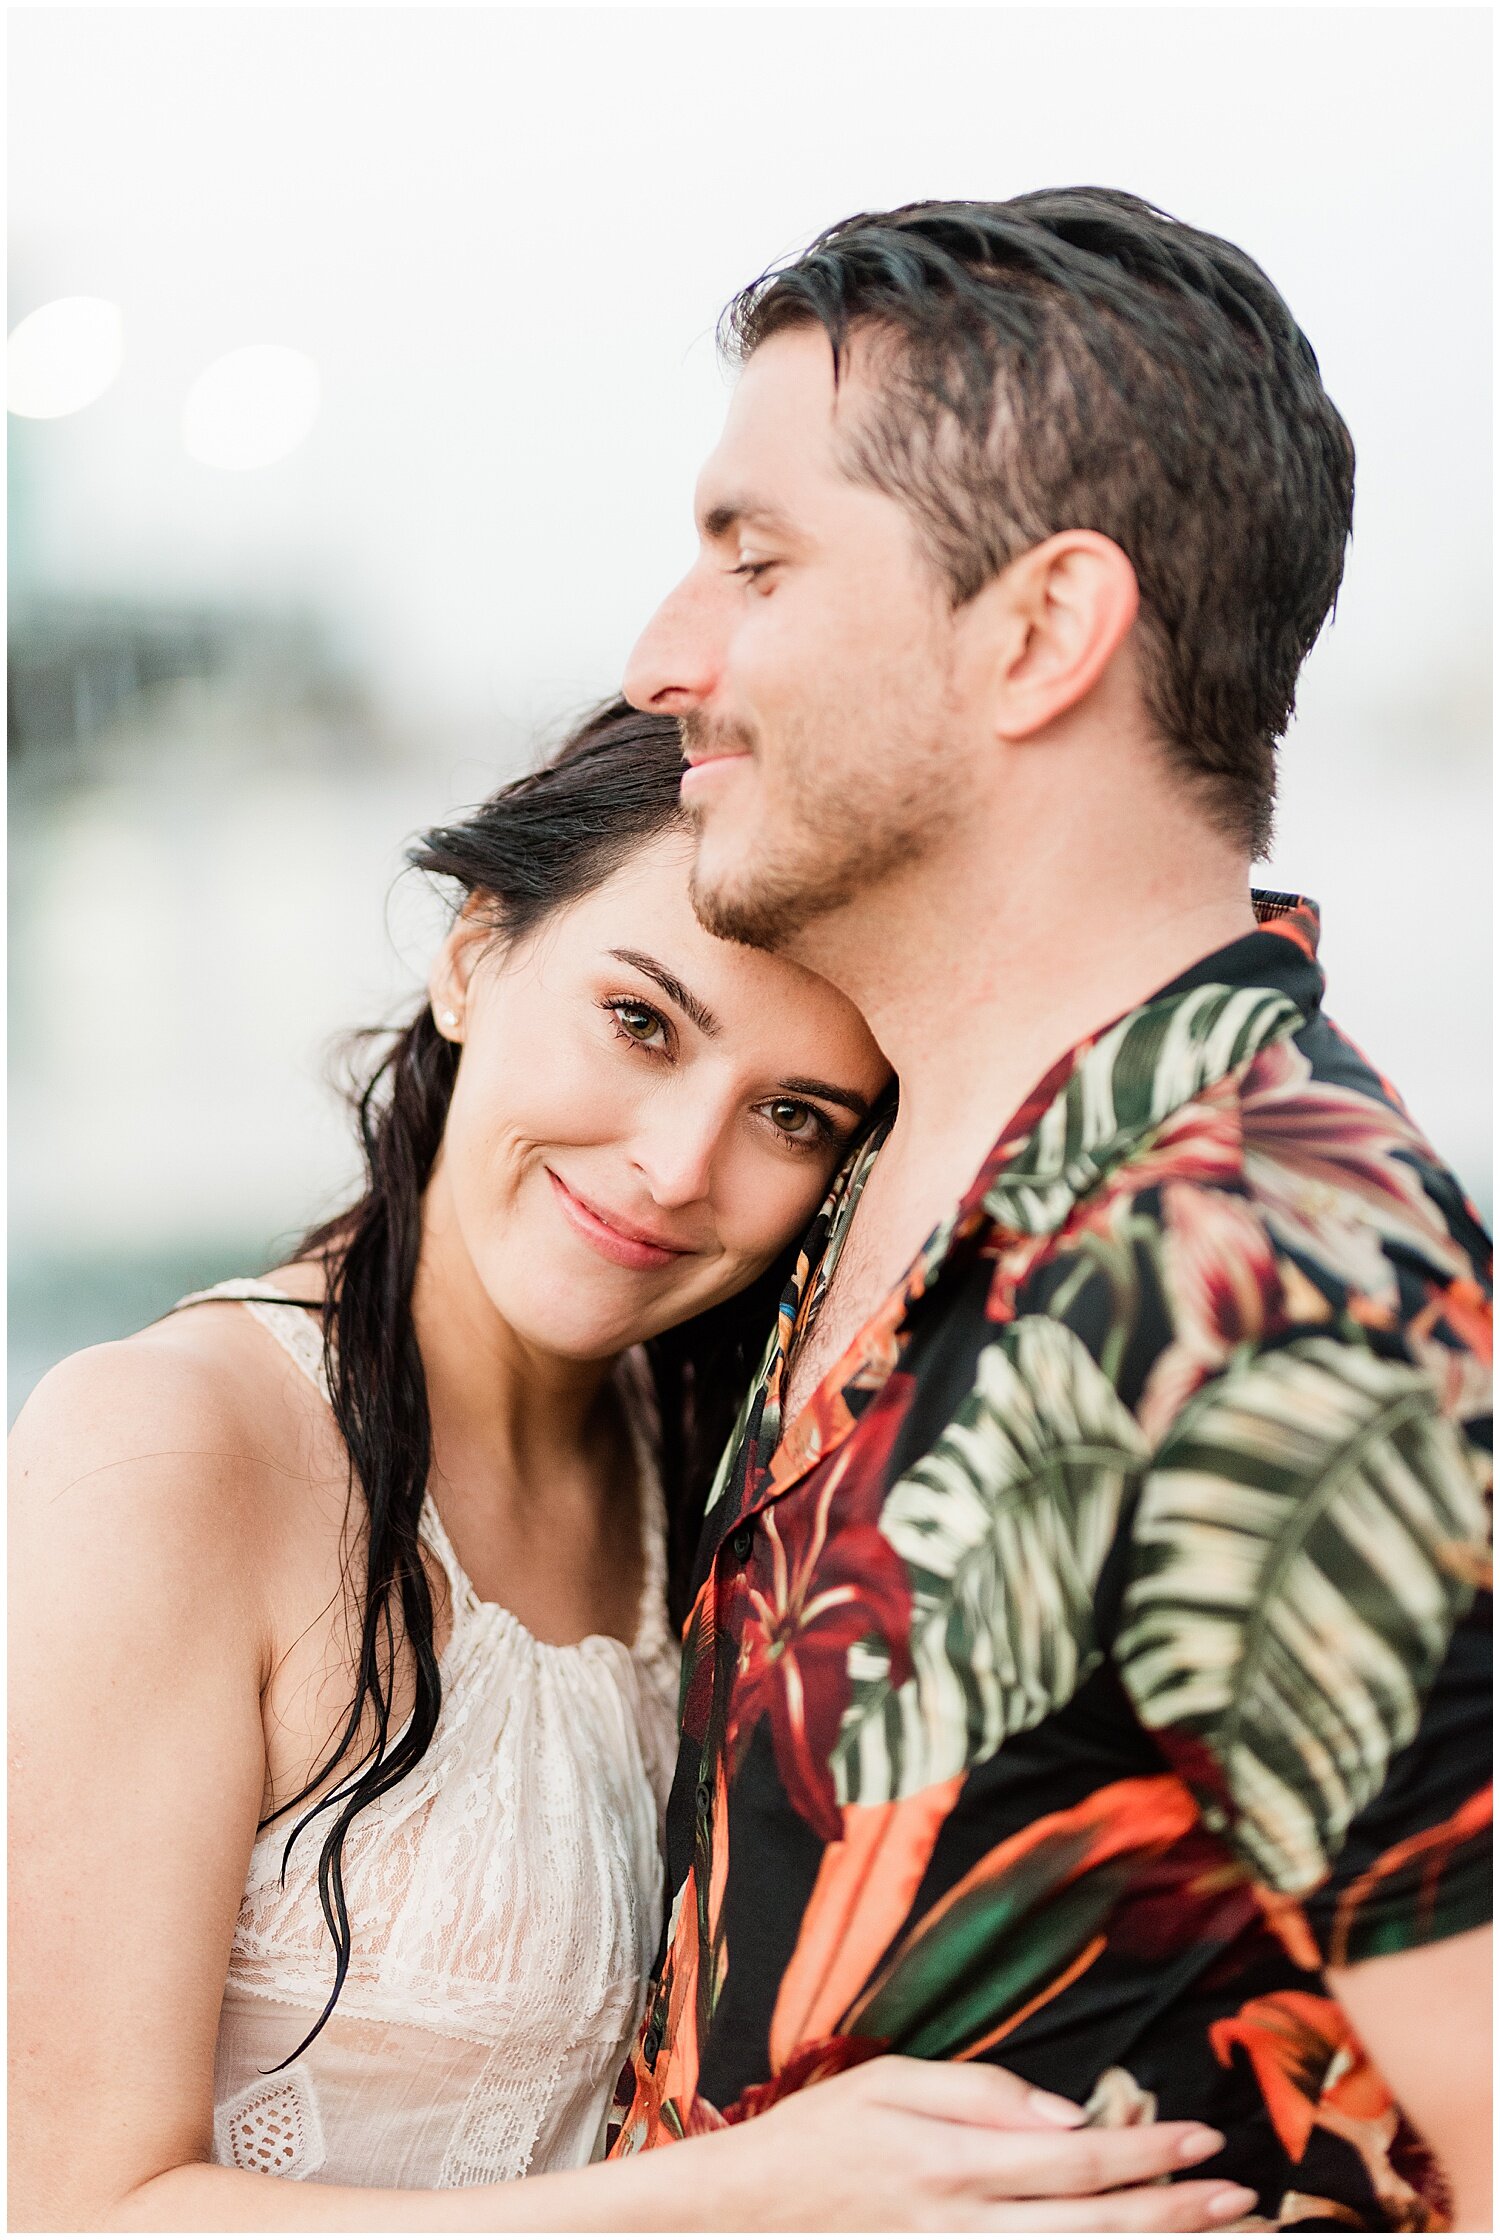  wet and wild wedding photos, the notebook inspired wedding photos, Cuban inspired wedding style, playful wedding couples,  